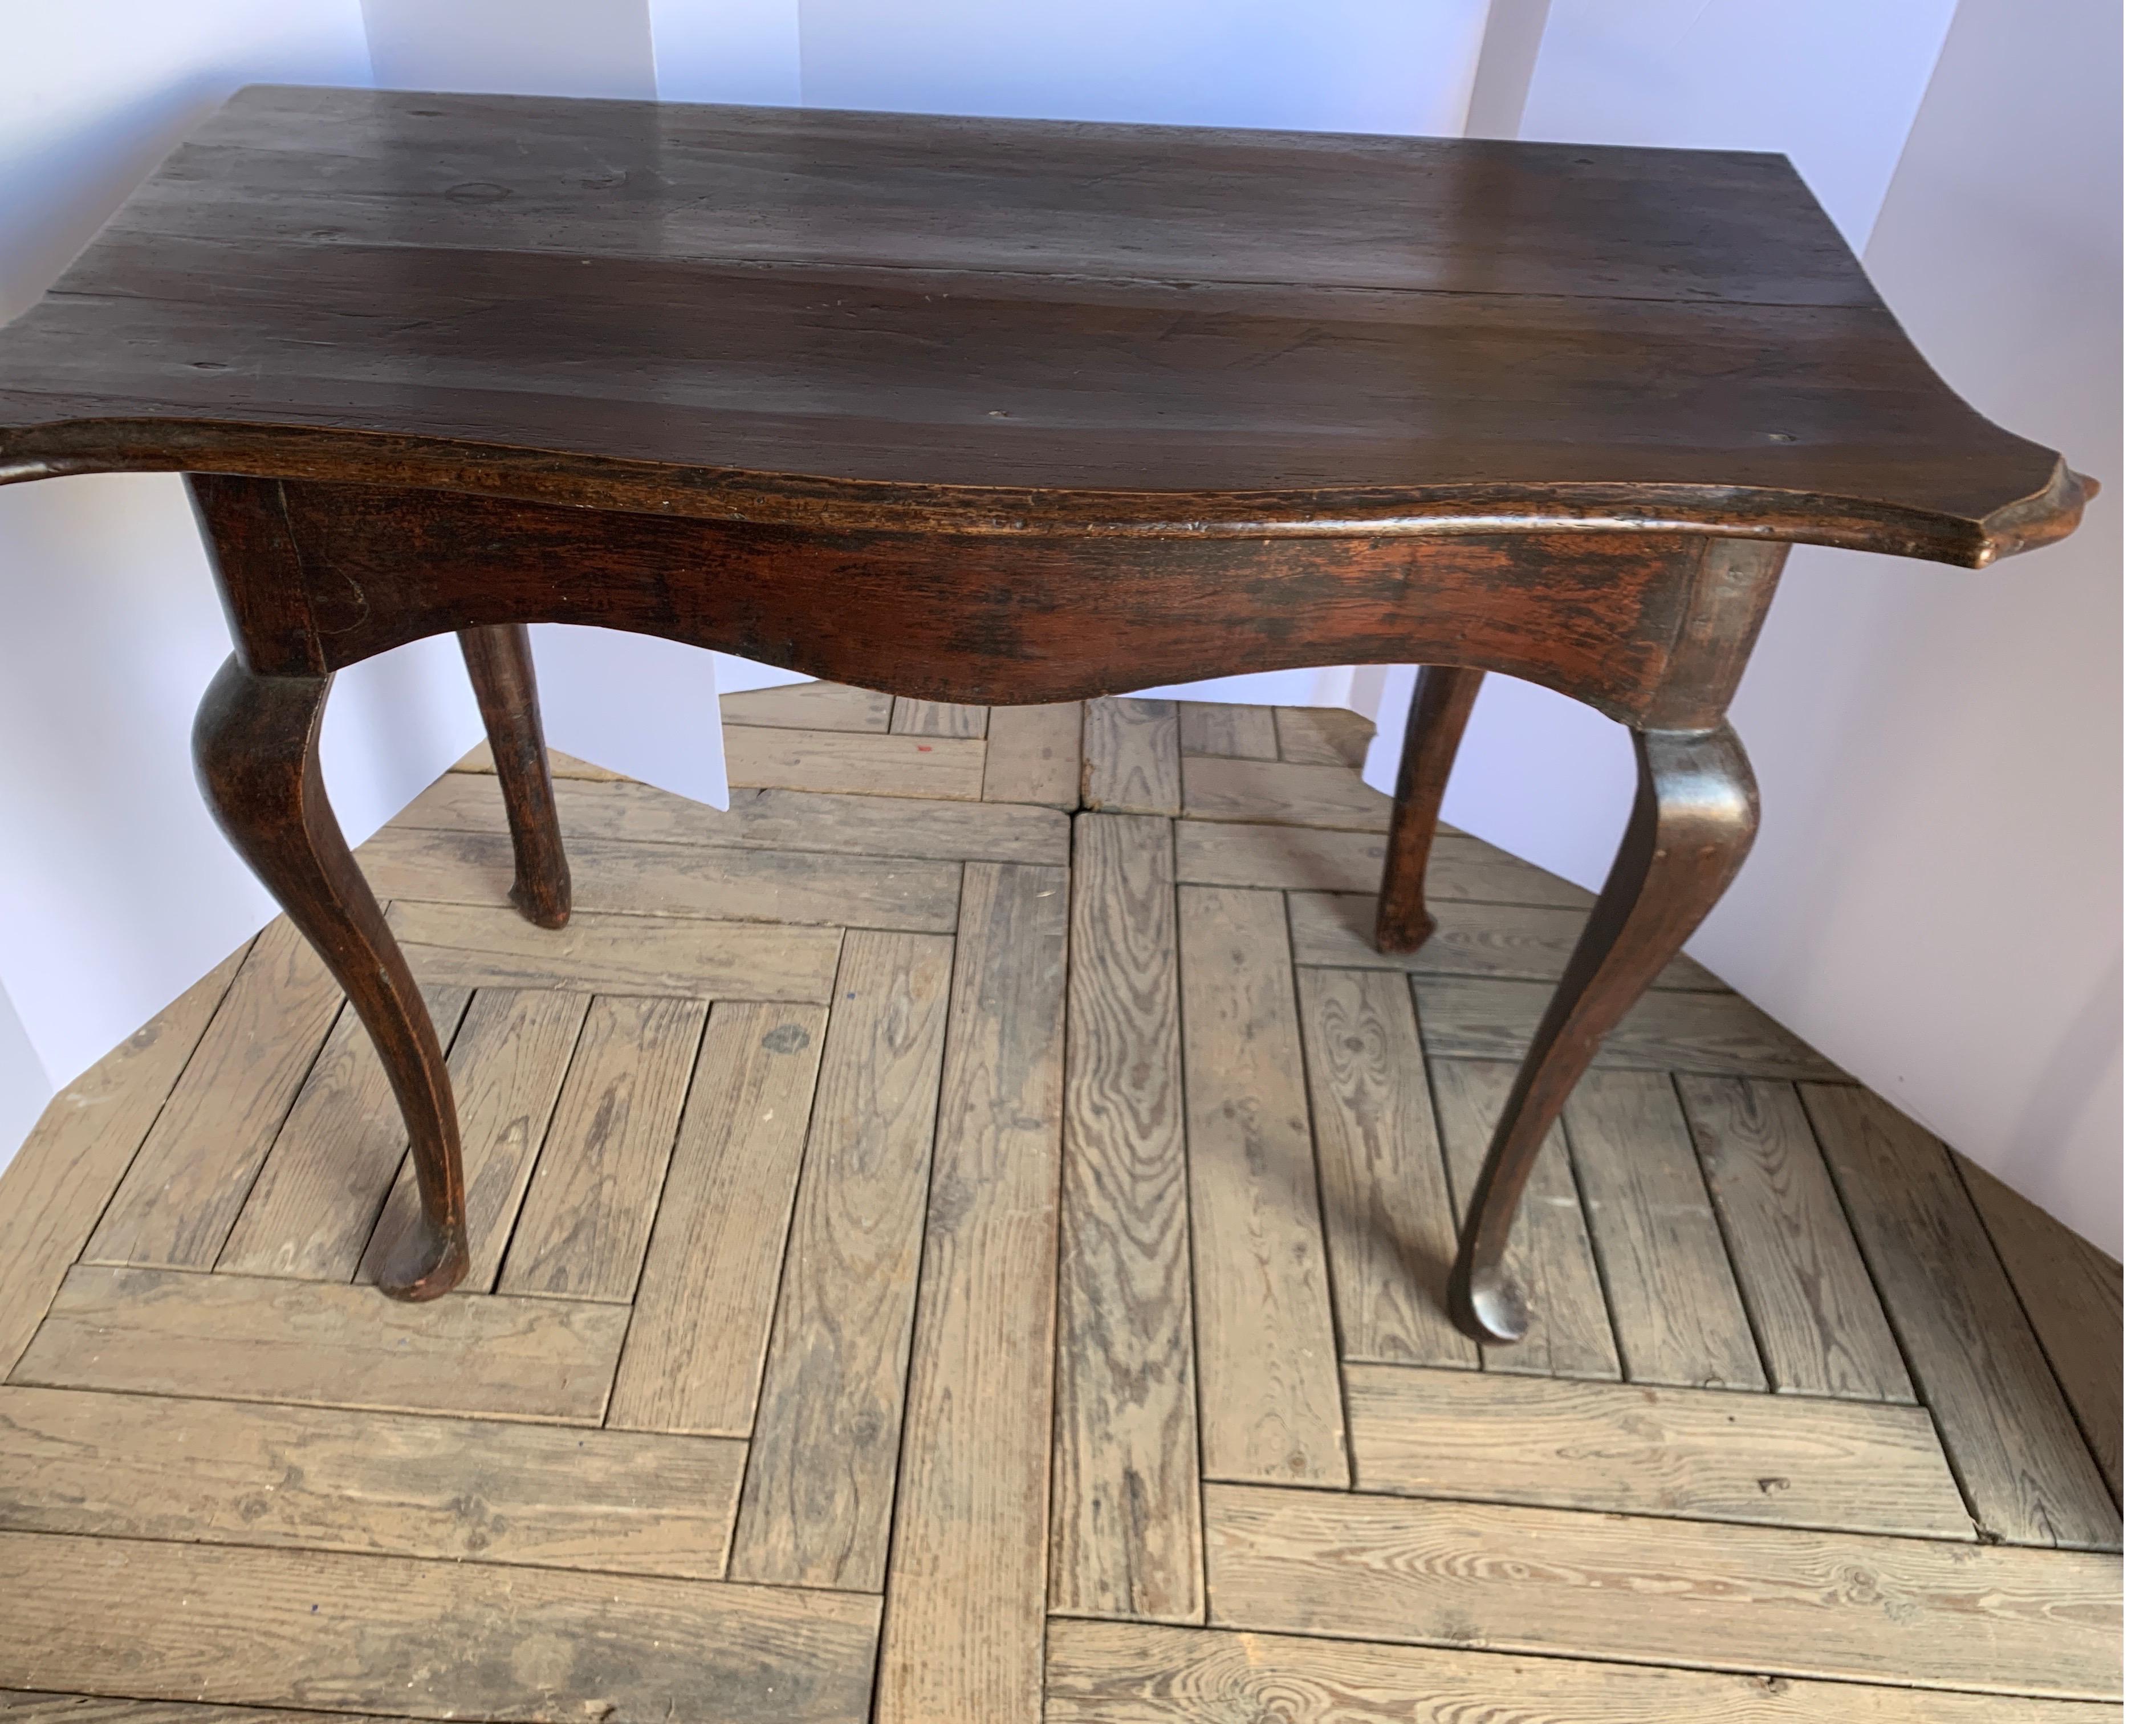 This is an elegant shaped walnut demilune shaped table from Italy. It dark warm patina gives it added character. It's one of a pair sold separately. It is pegged and beautifully constructed. The front leg on the left has had a repair in the past. It